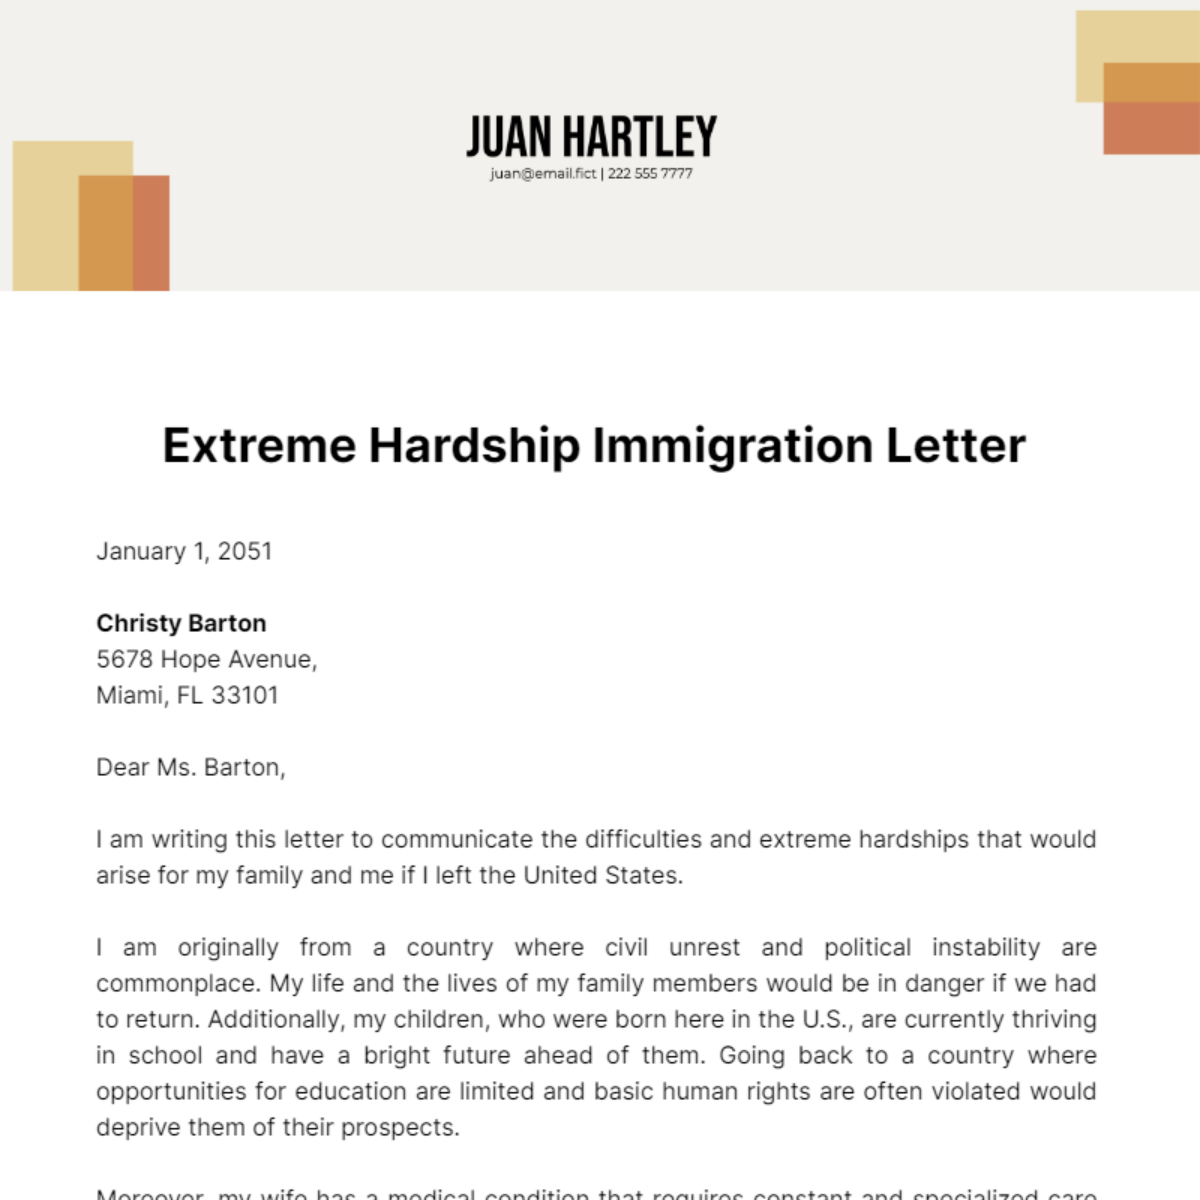 Extreme Hardship Immigration Letter Template